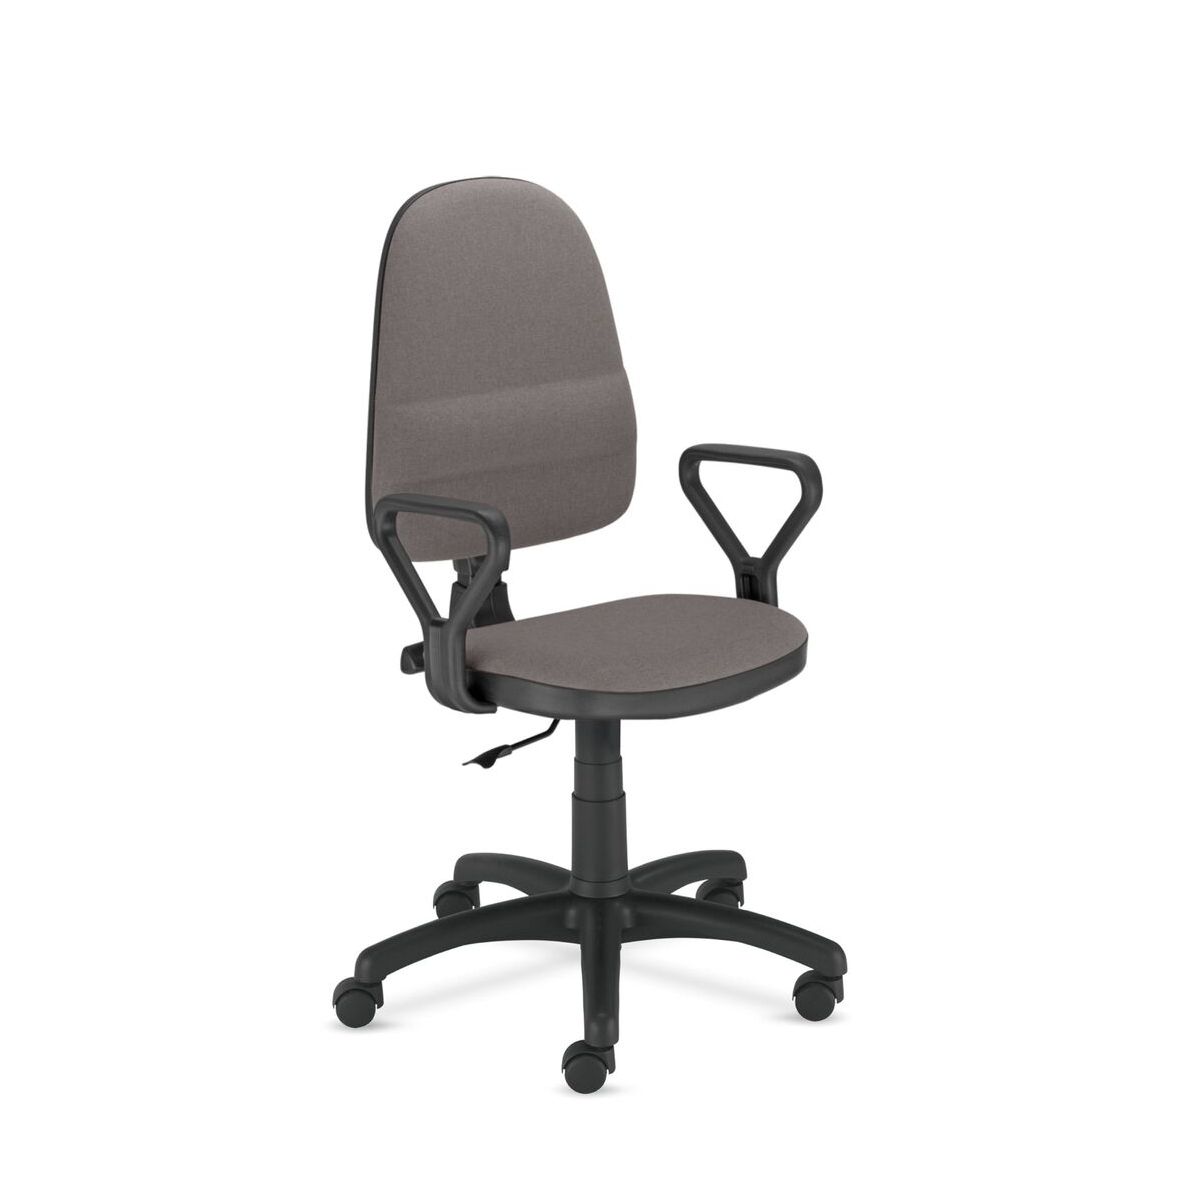 office-chairs_1-1_Master-1.jpg